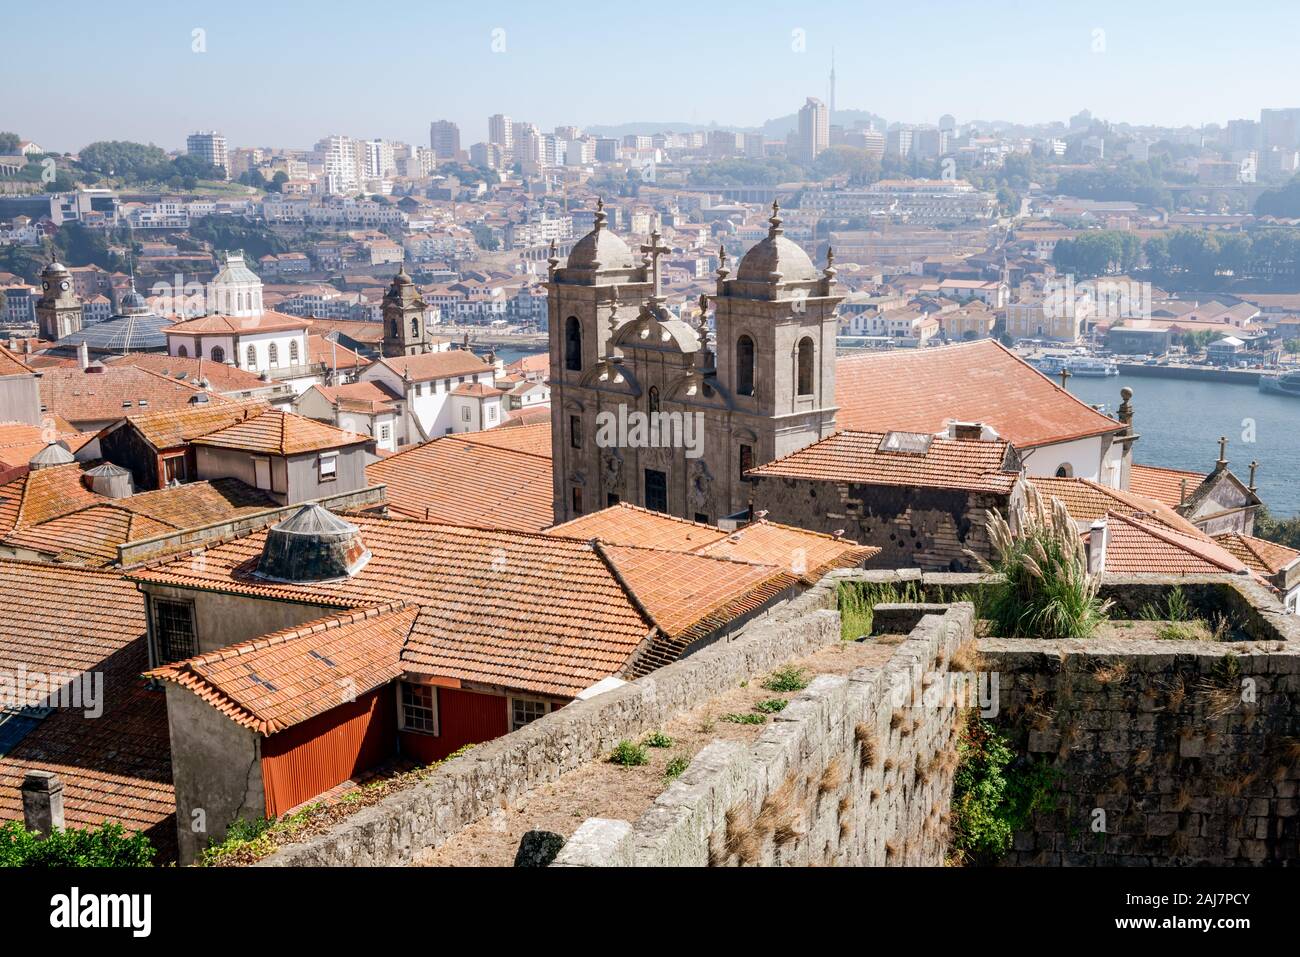 View across the city of Porto with Convent of Sao Joao Novo Church in the foreground, Portugal. Photograph: Tony Taylor Stock Photo